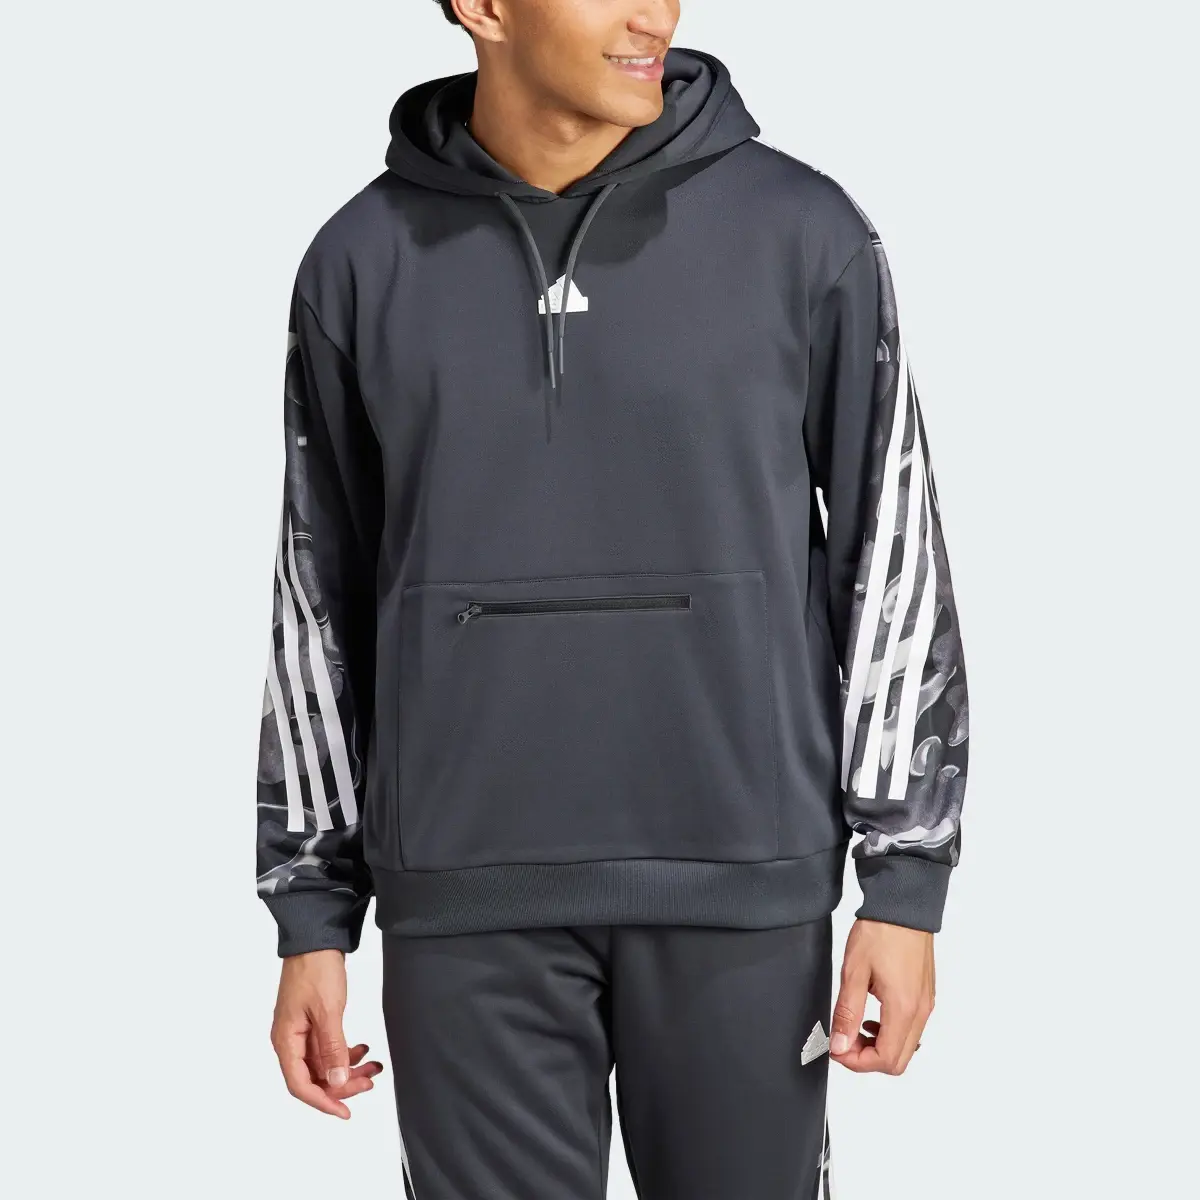 Adidas Future Icons Allover Print Hoodie. 1